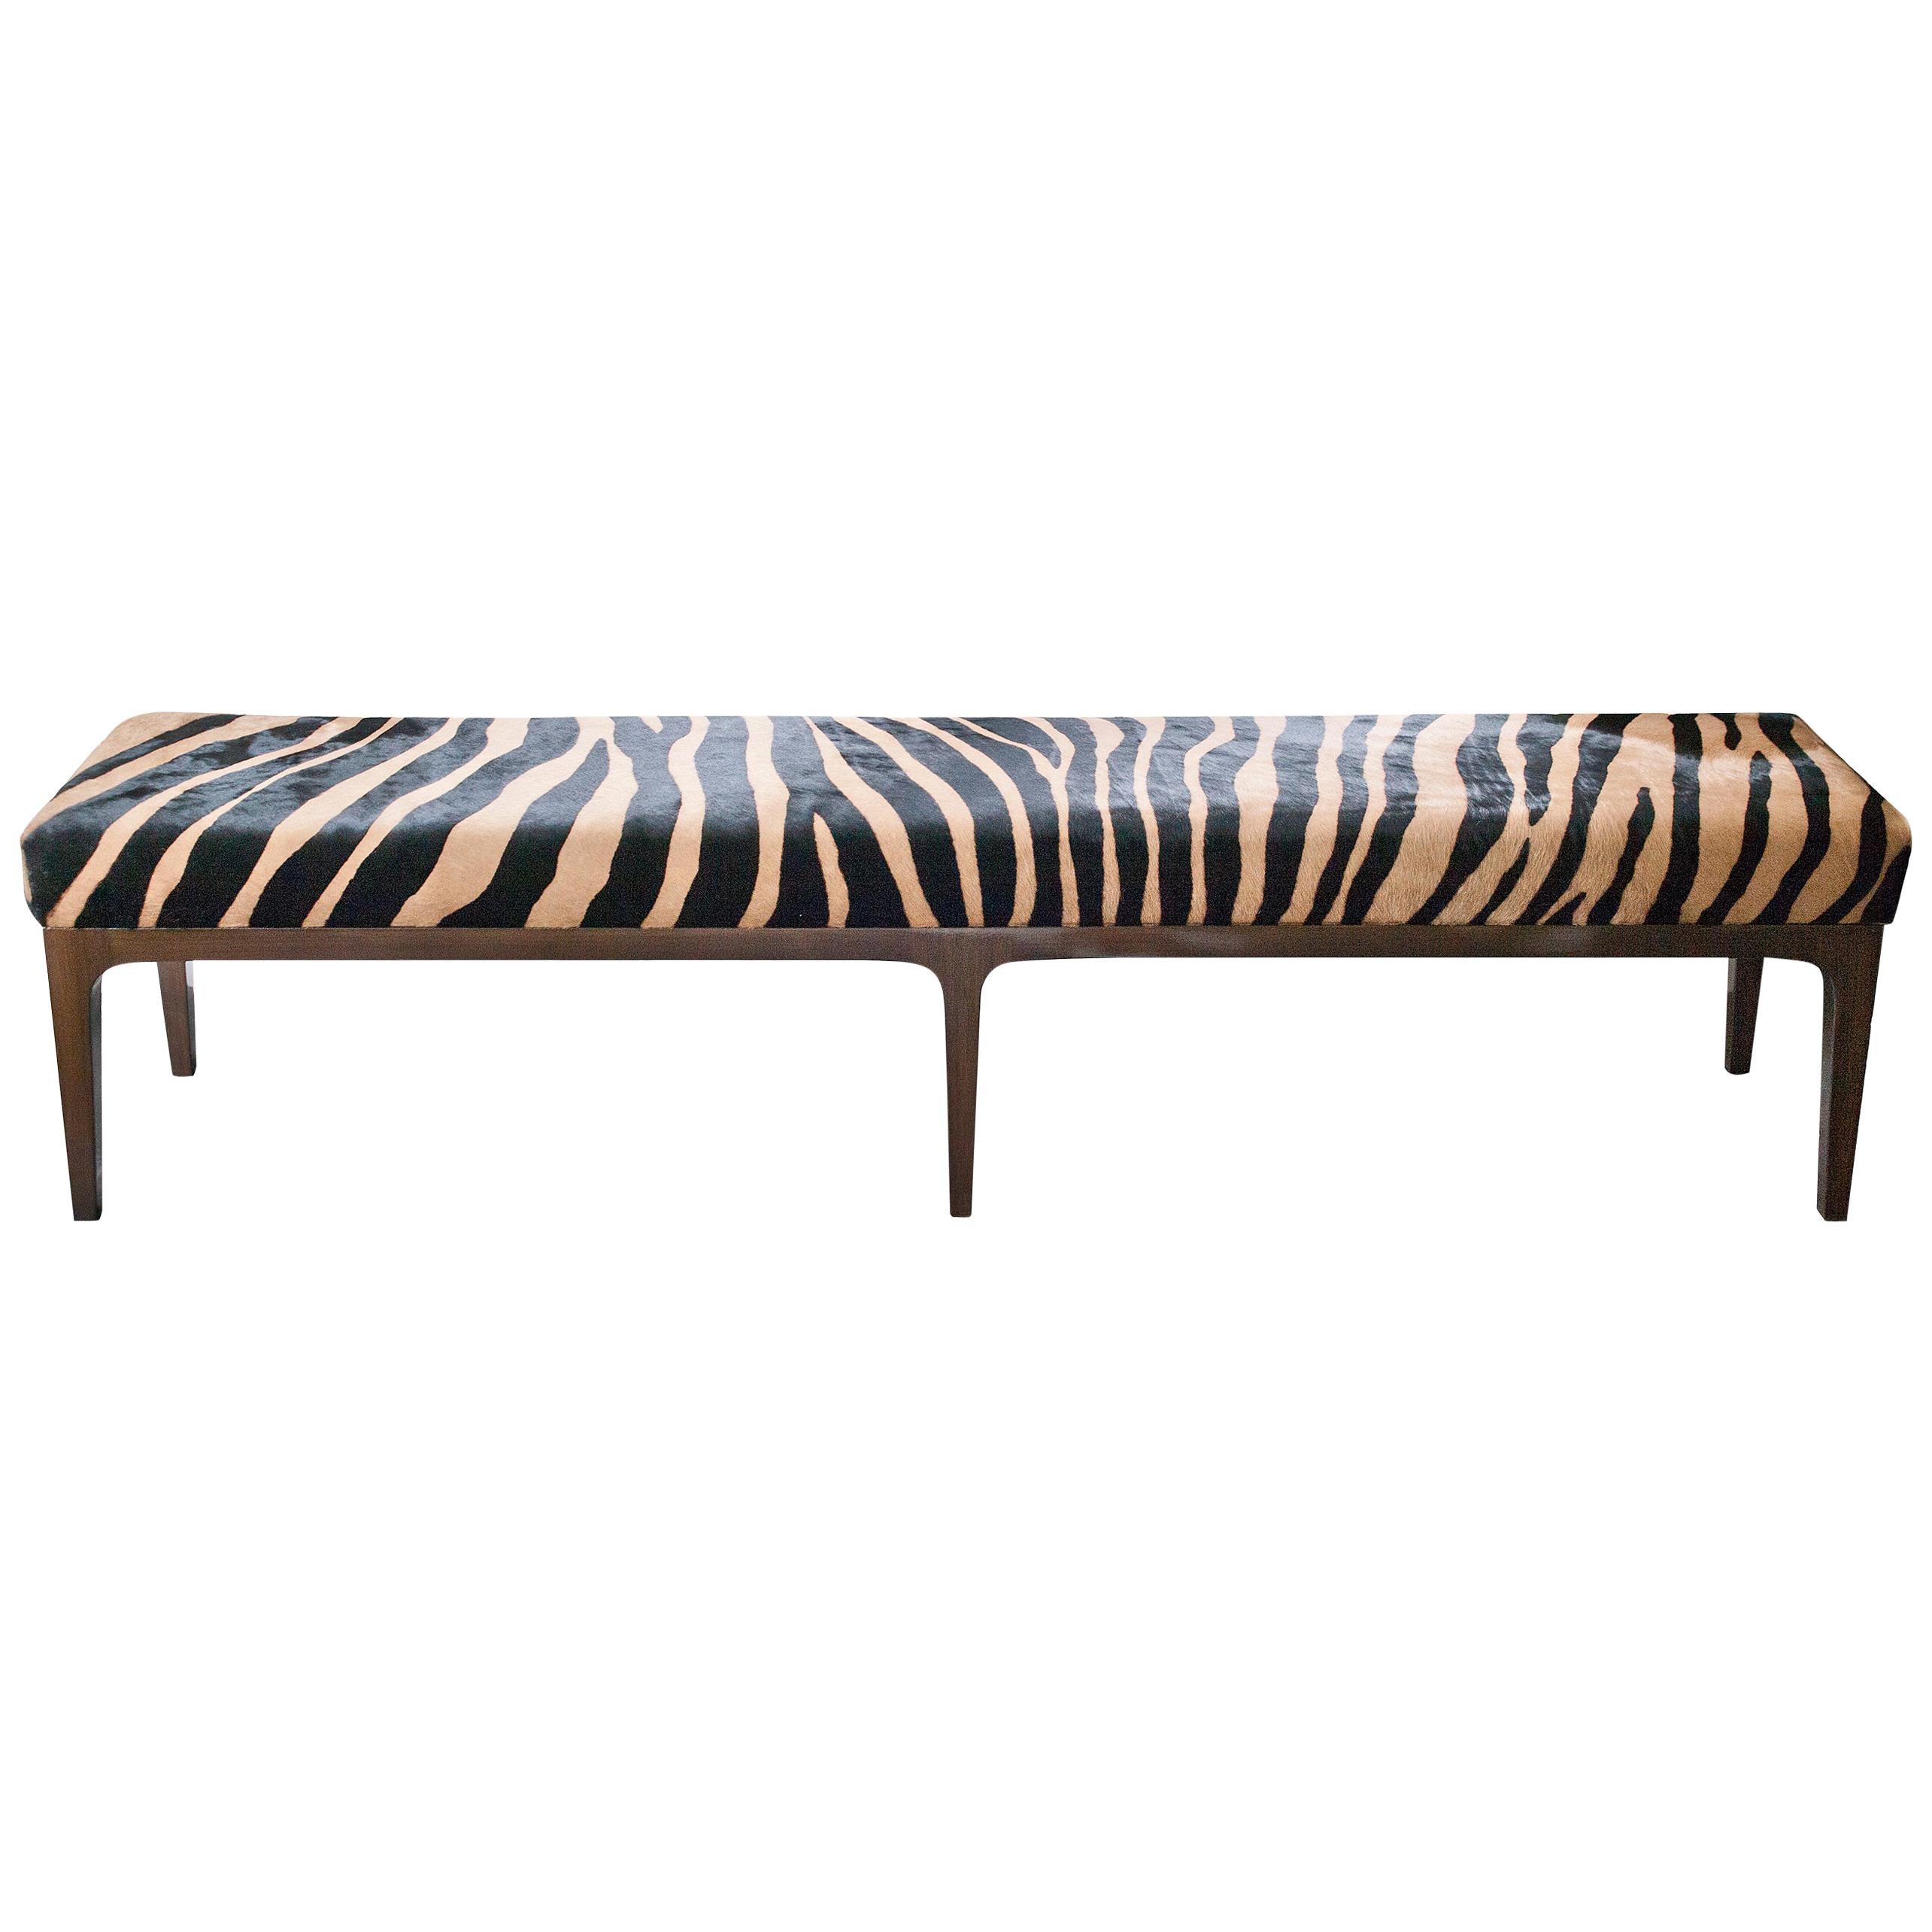 Mid-Century Modern Style Zebra Stenciled Cowhide Hair Upholstered Bench For Sale